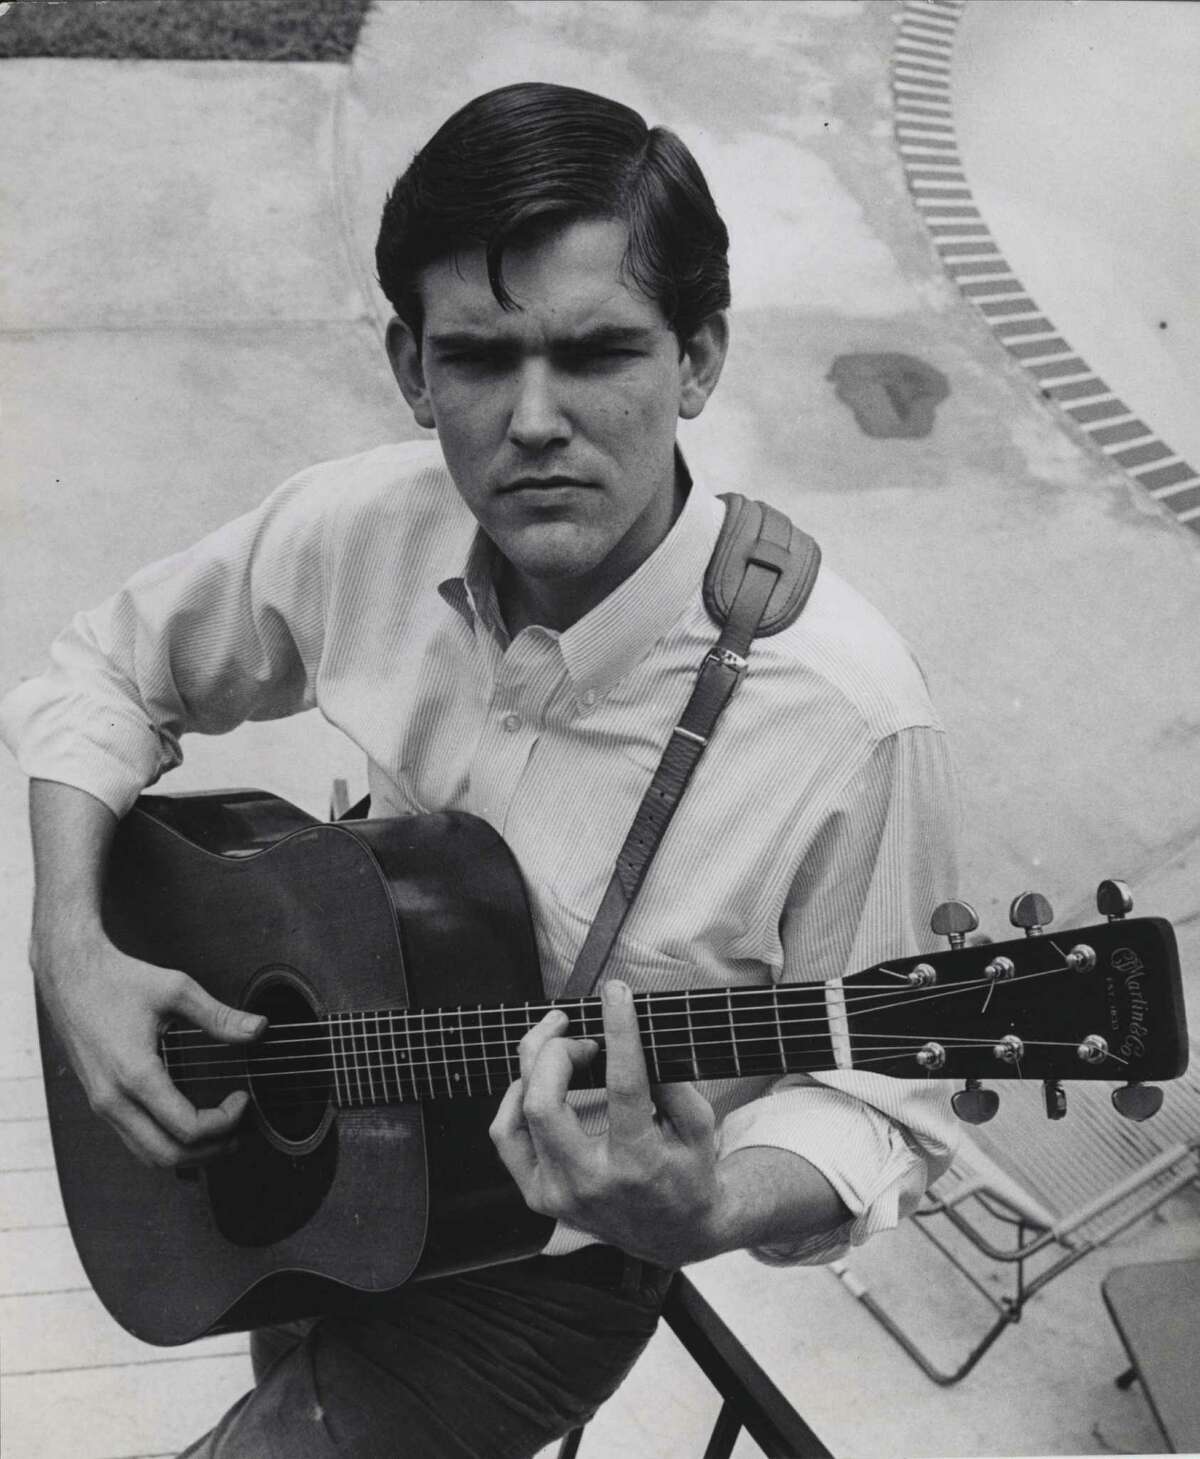 Guy Clark "One of the great songwriters Texas ever produced, Monahans native Guy Clark, condensed epic novels about everyday characters into three-minute songs that spilled with loaded pieces of information. He died May 17 at 74." More on Guy Clark